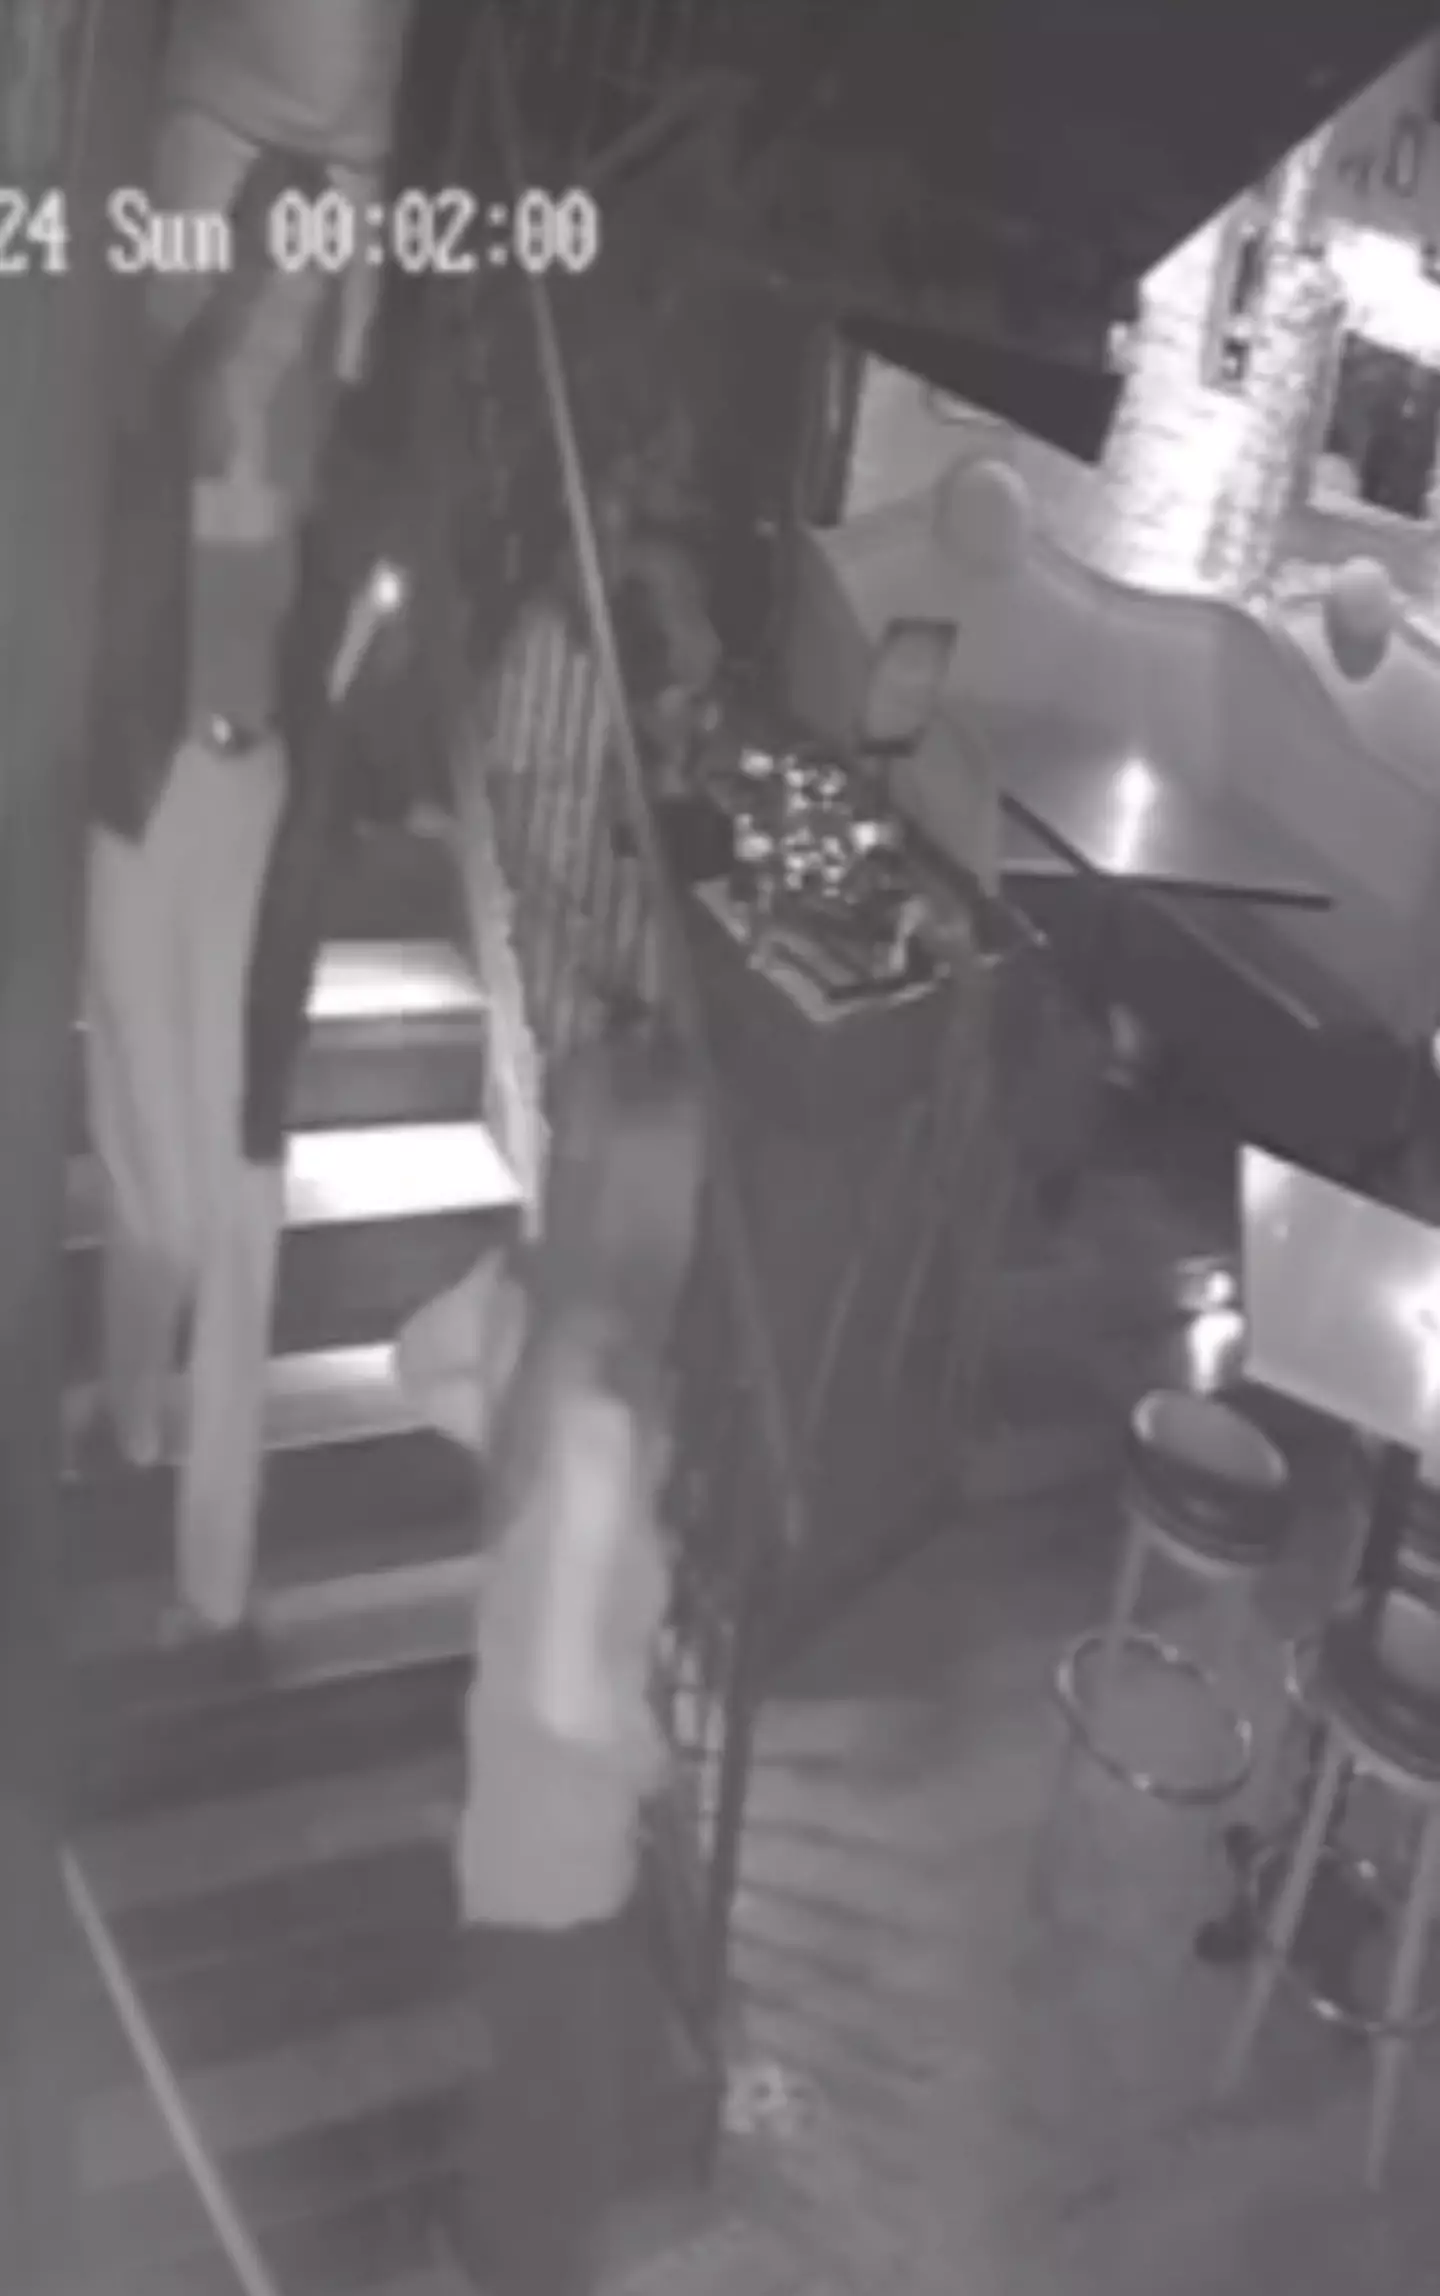 The restaurant posted CCTV footage from the evening.